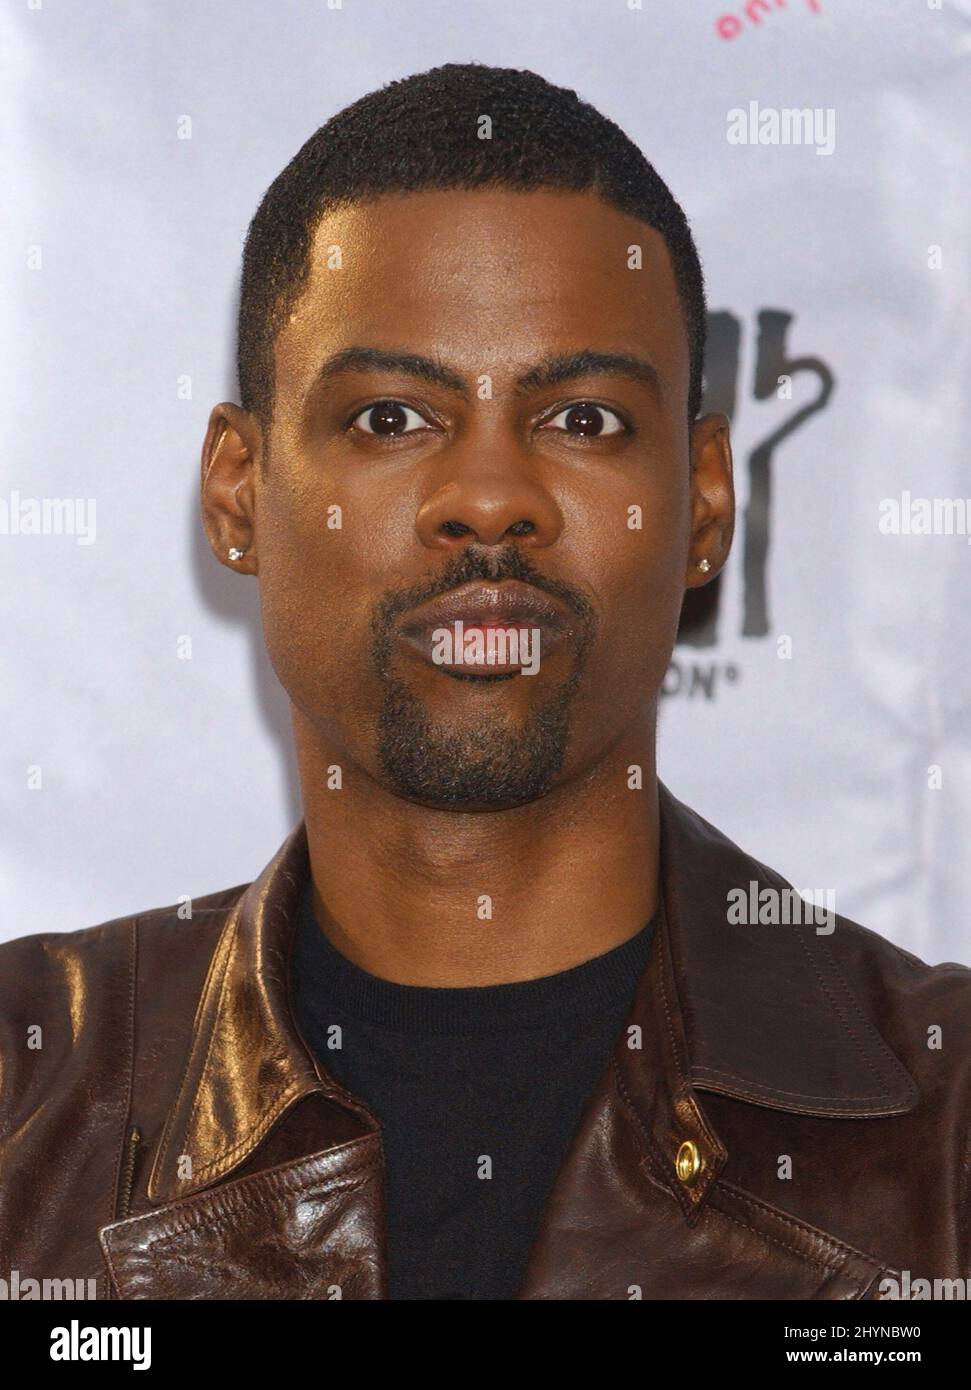 Chris Rock at the MTV Video Music Awards 2003 (VMA) in New York. Â©Doug  Peters/allaction.co.uk Stock Photo - Alamy